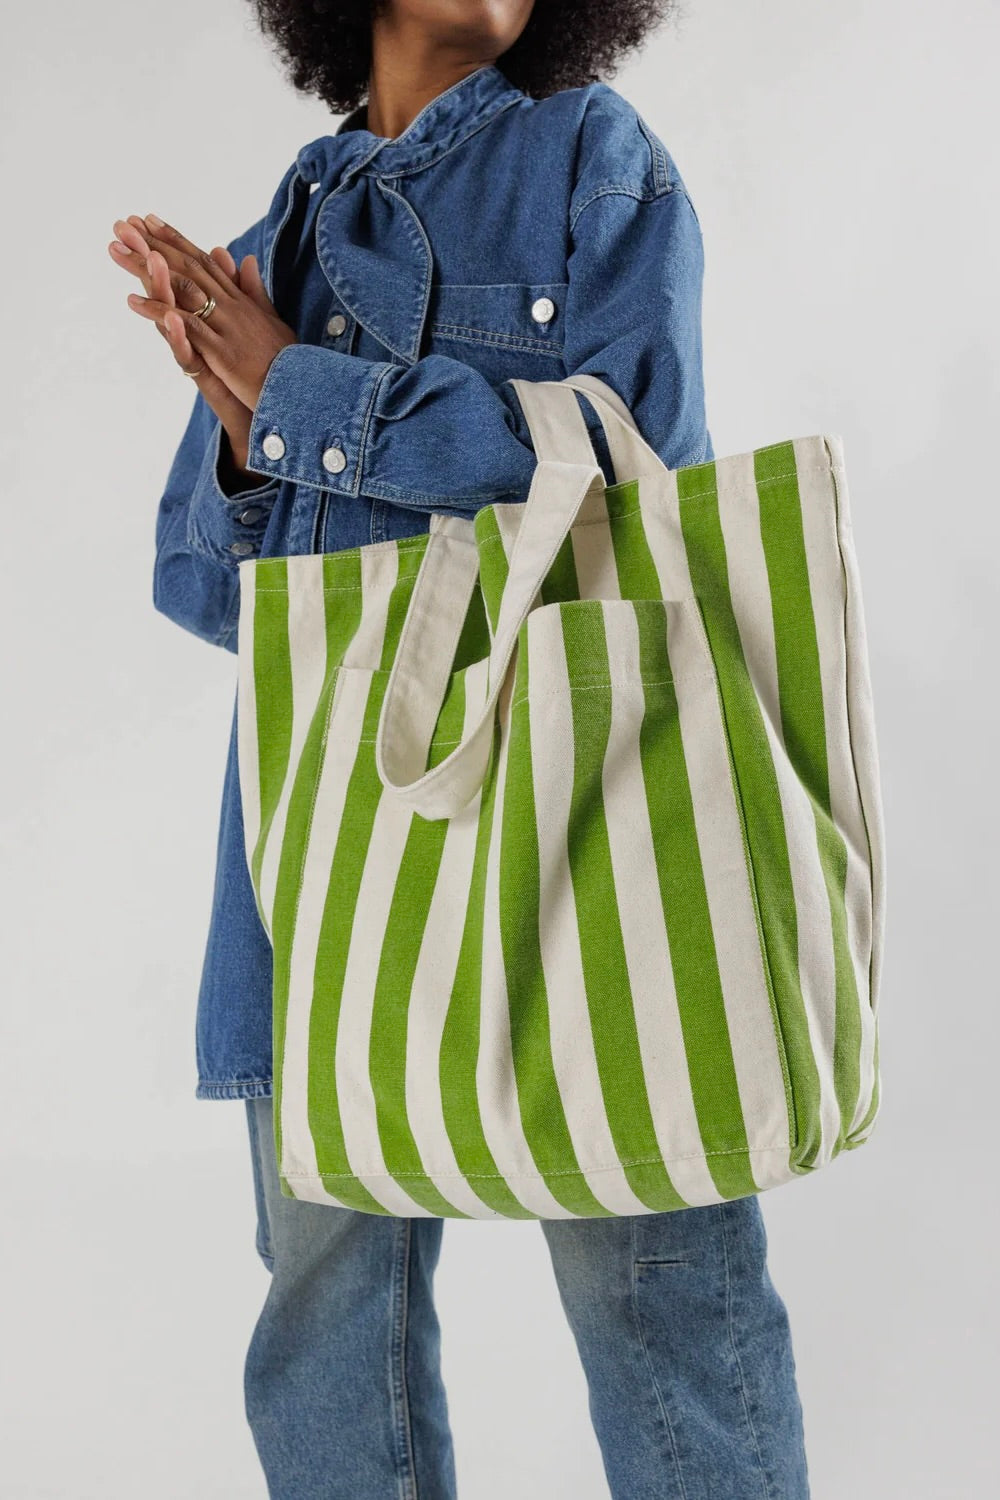 Giant Pocket Tote / Green Awning Stripe – ad hoc penticton